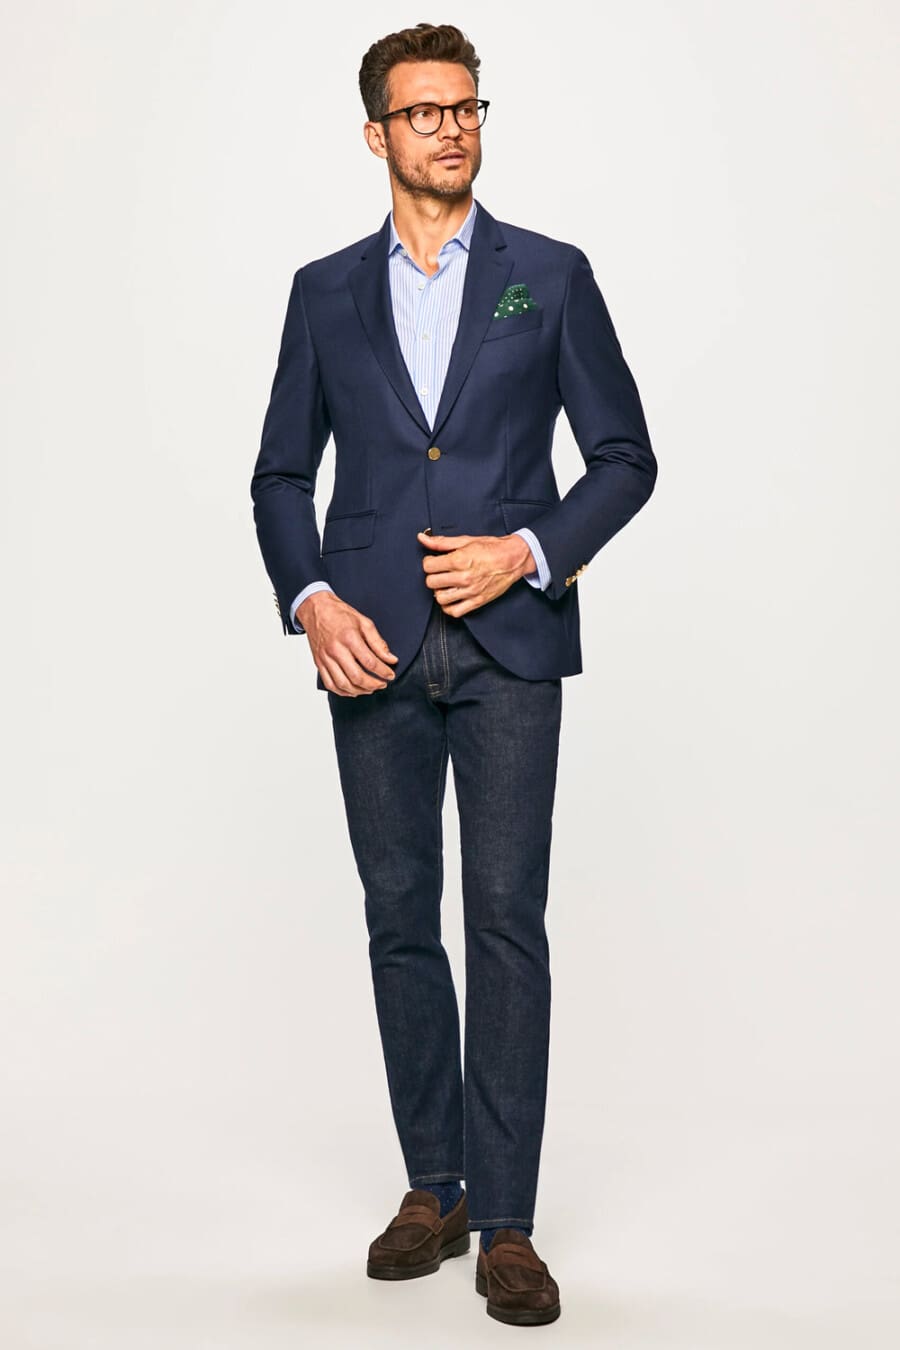 Men's Navy single-breasted blazer, dark raw denim jeans, light blue striped shirt and brown suede penny loafers outfit